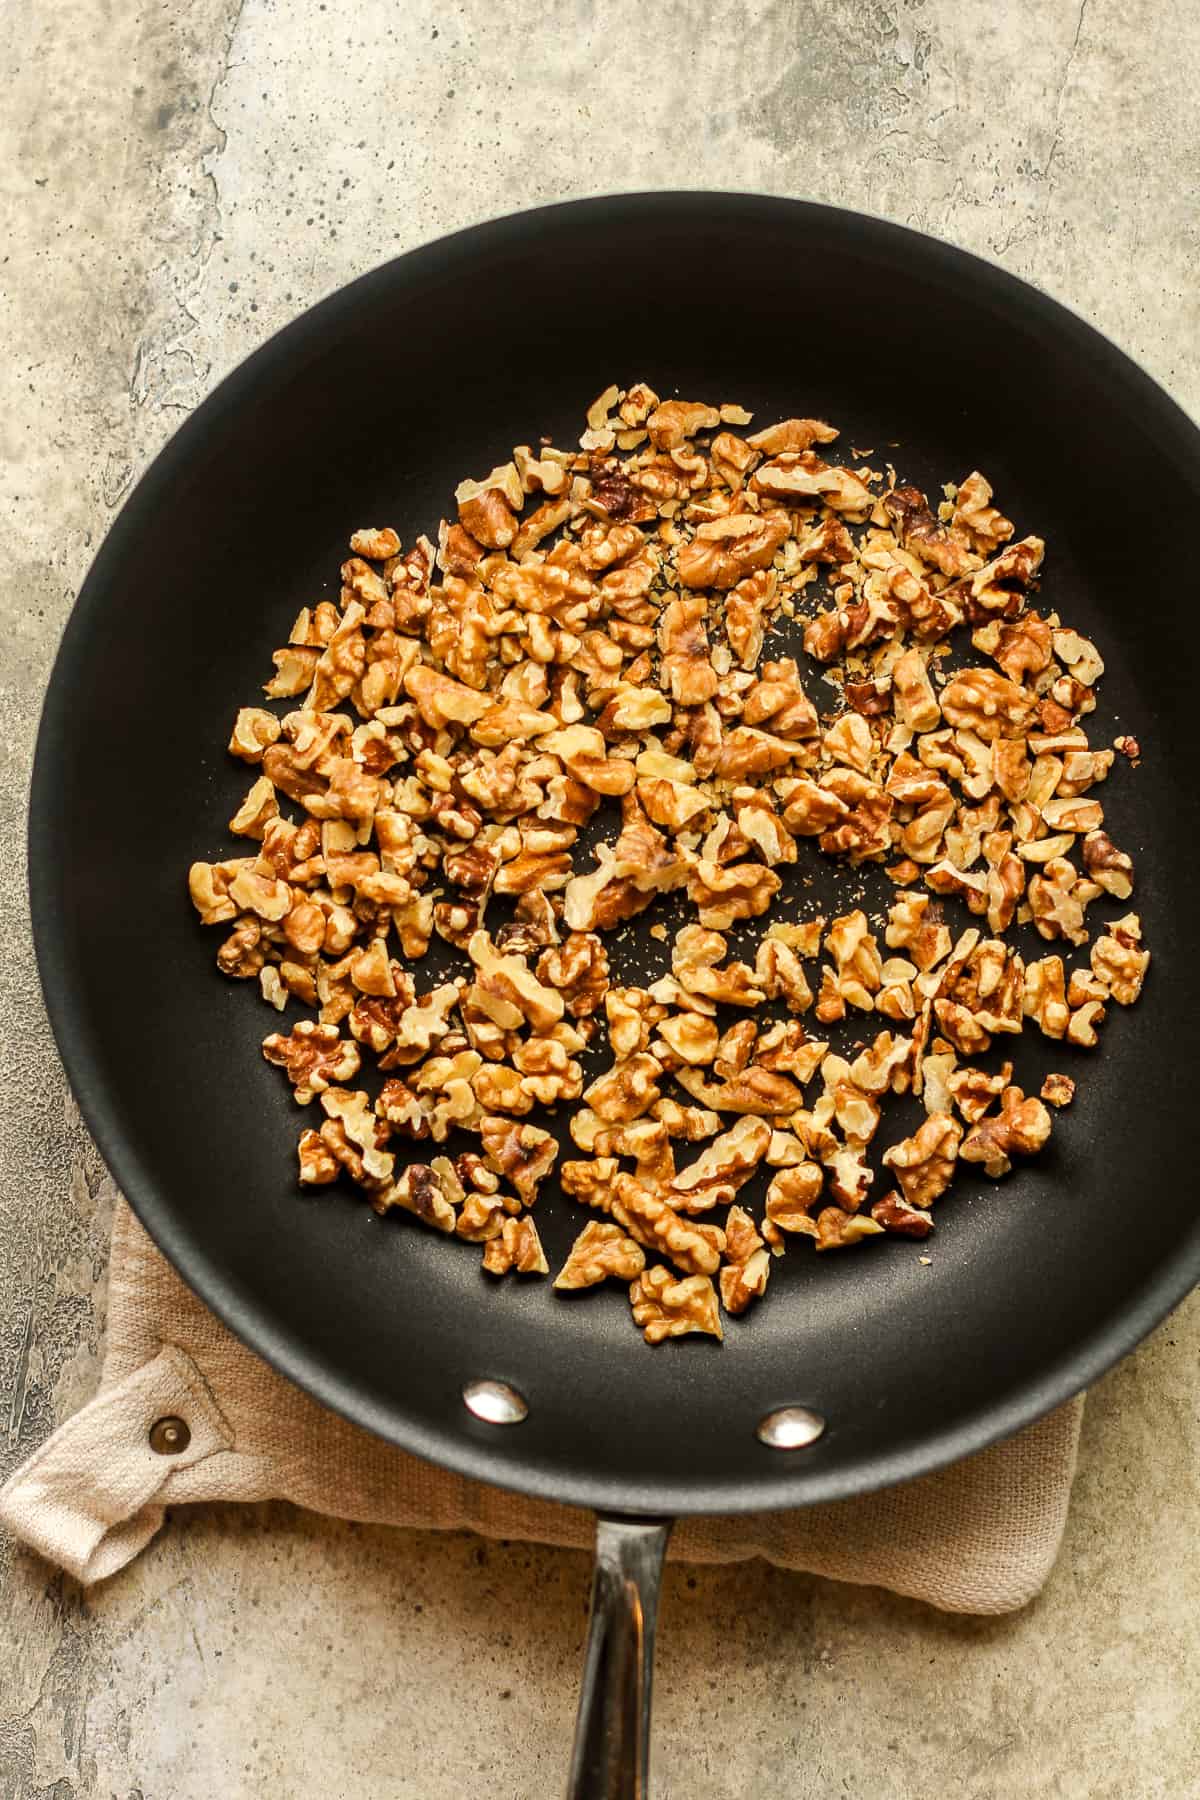 A pan of toasted walnuts.